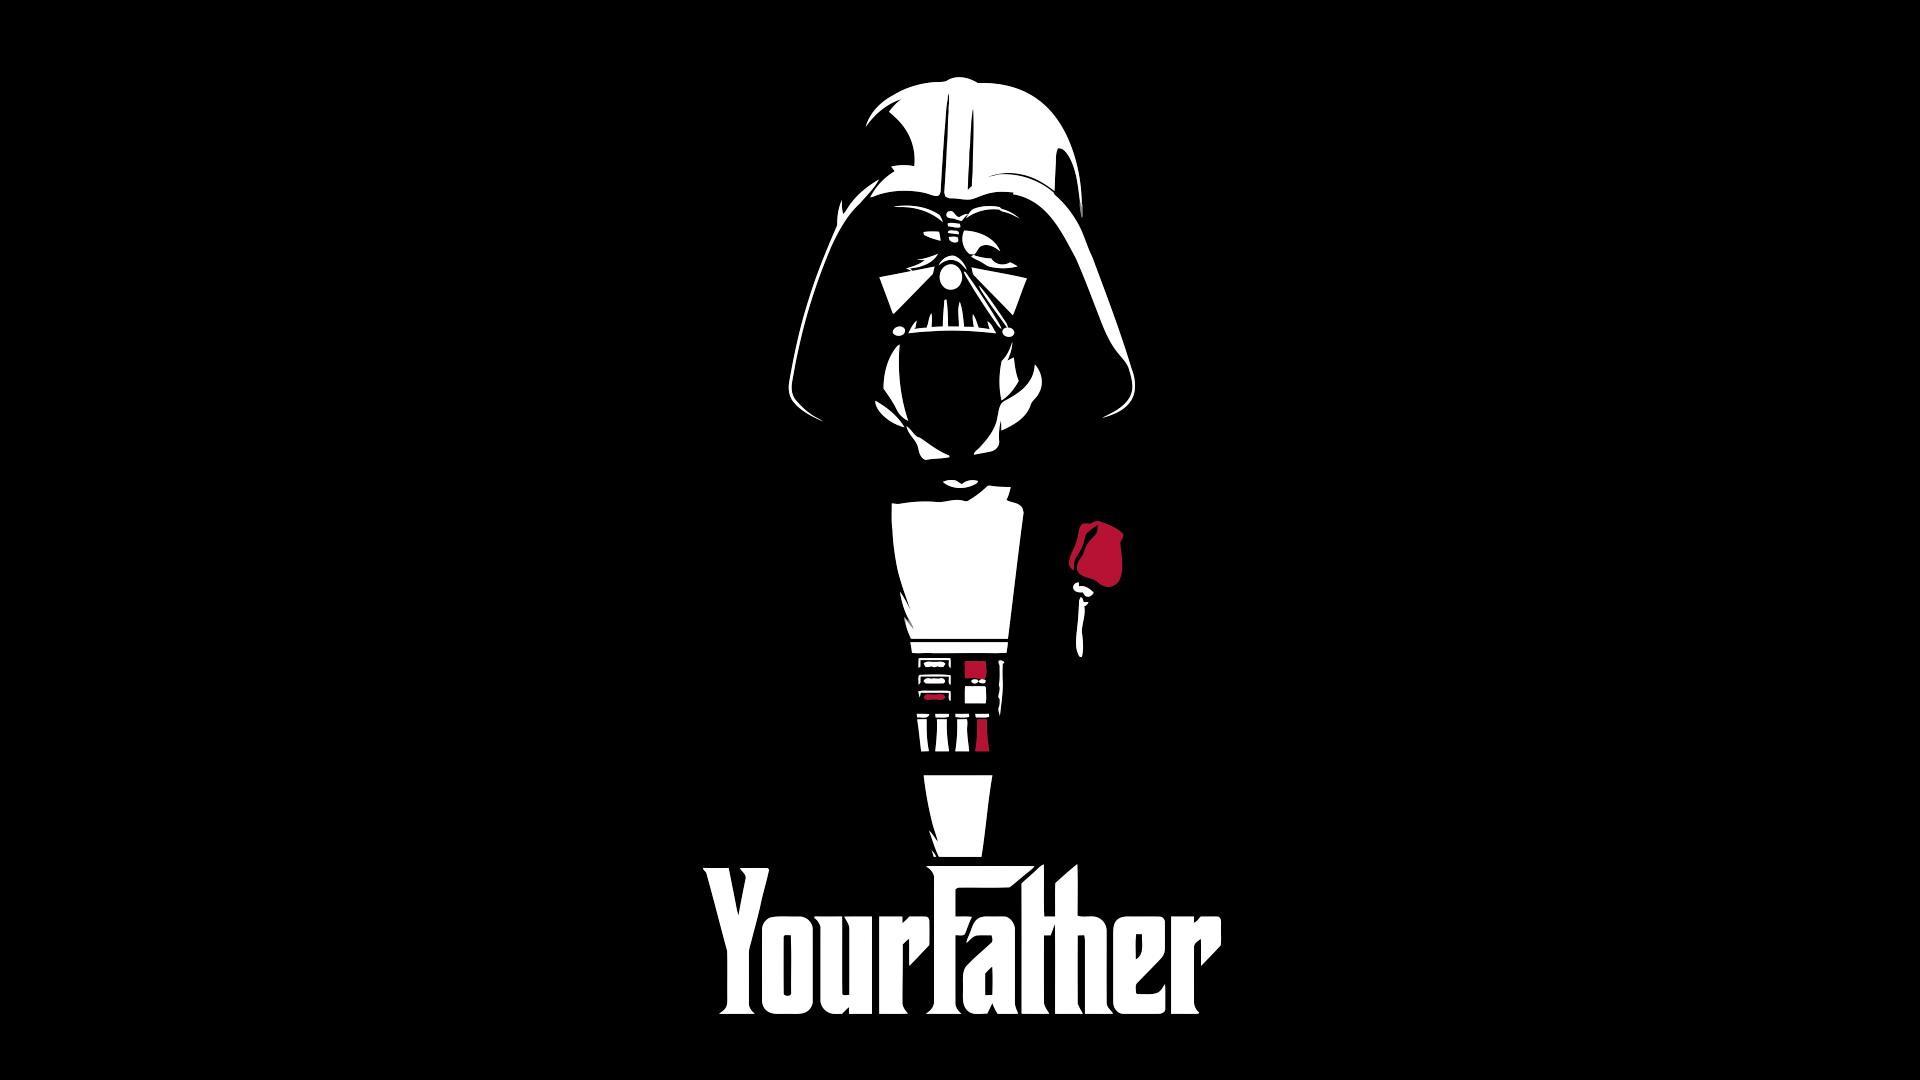 YourFather Wallpaper Volume 2